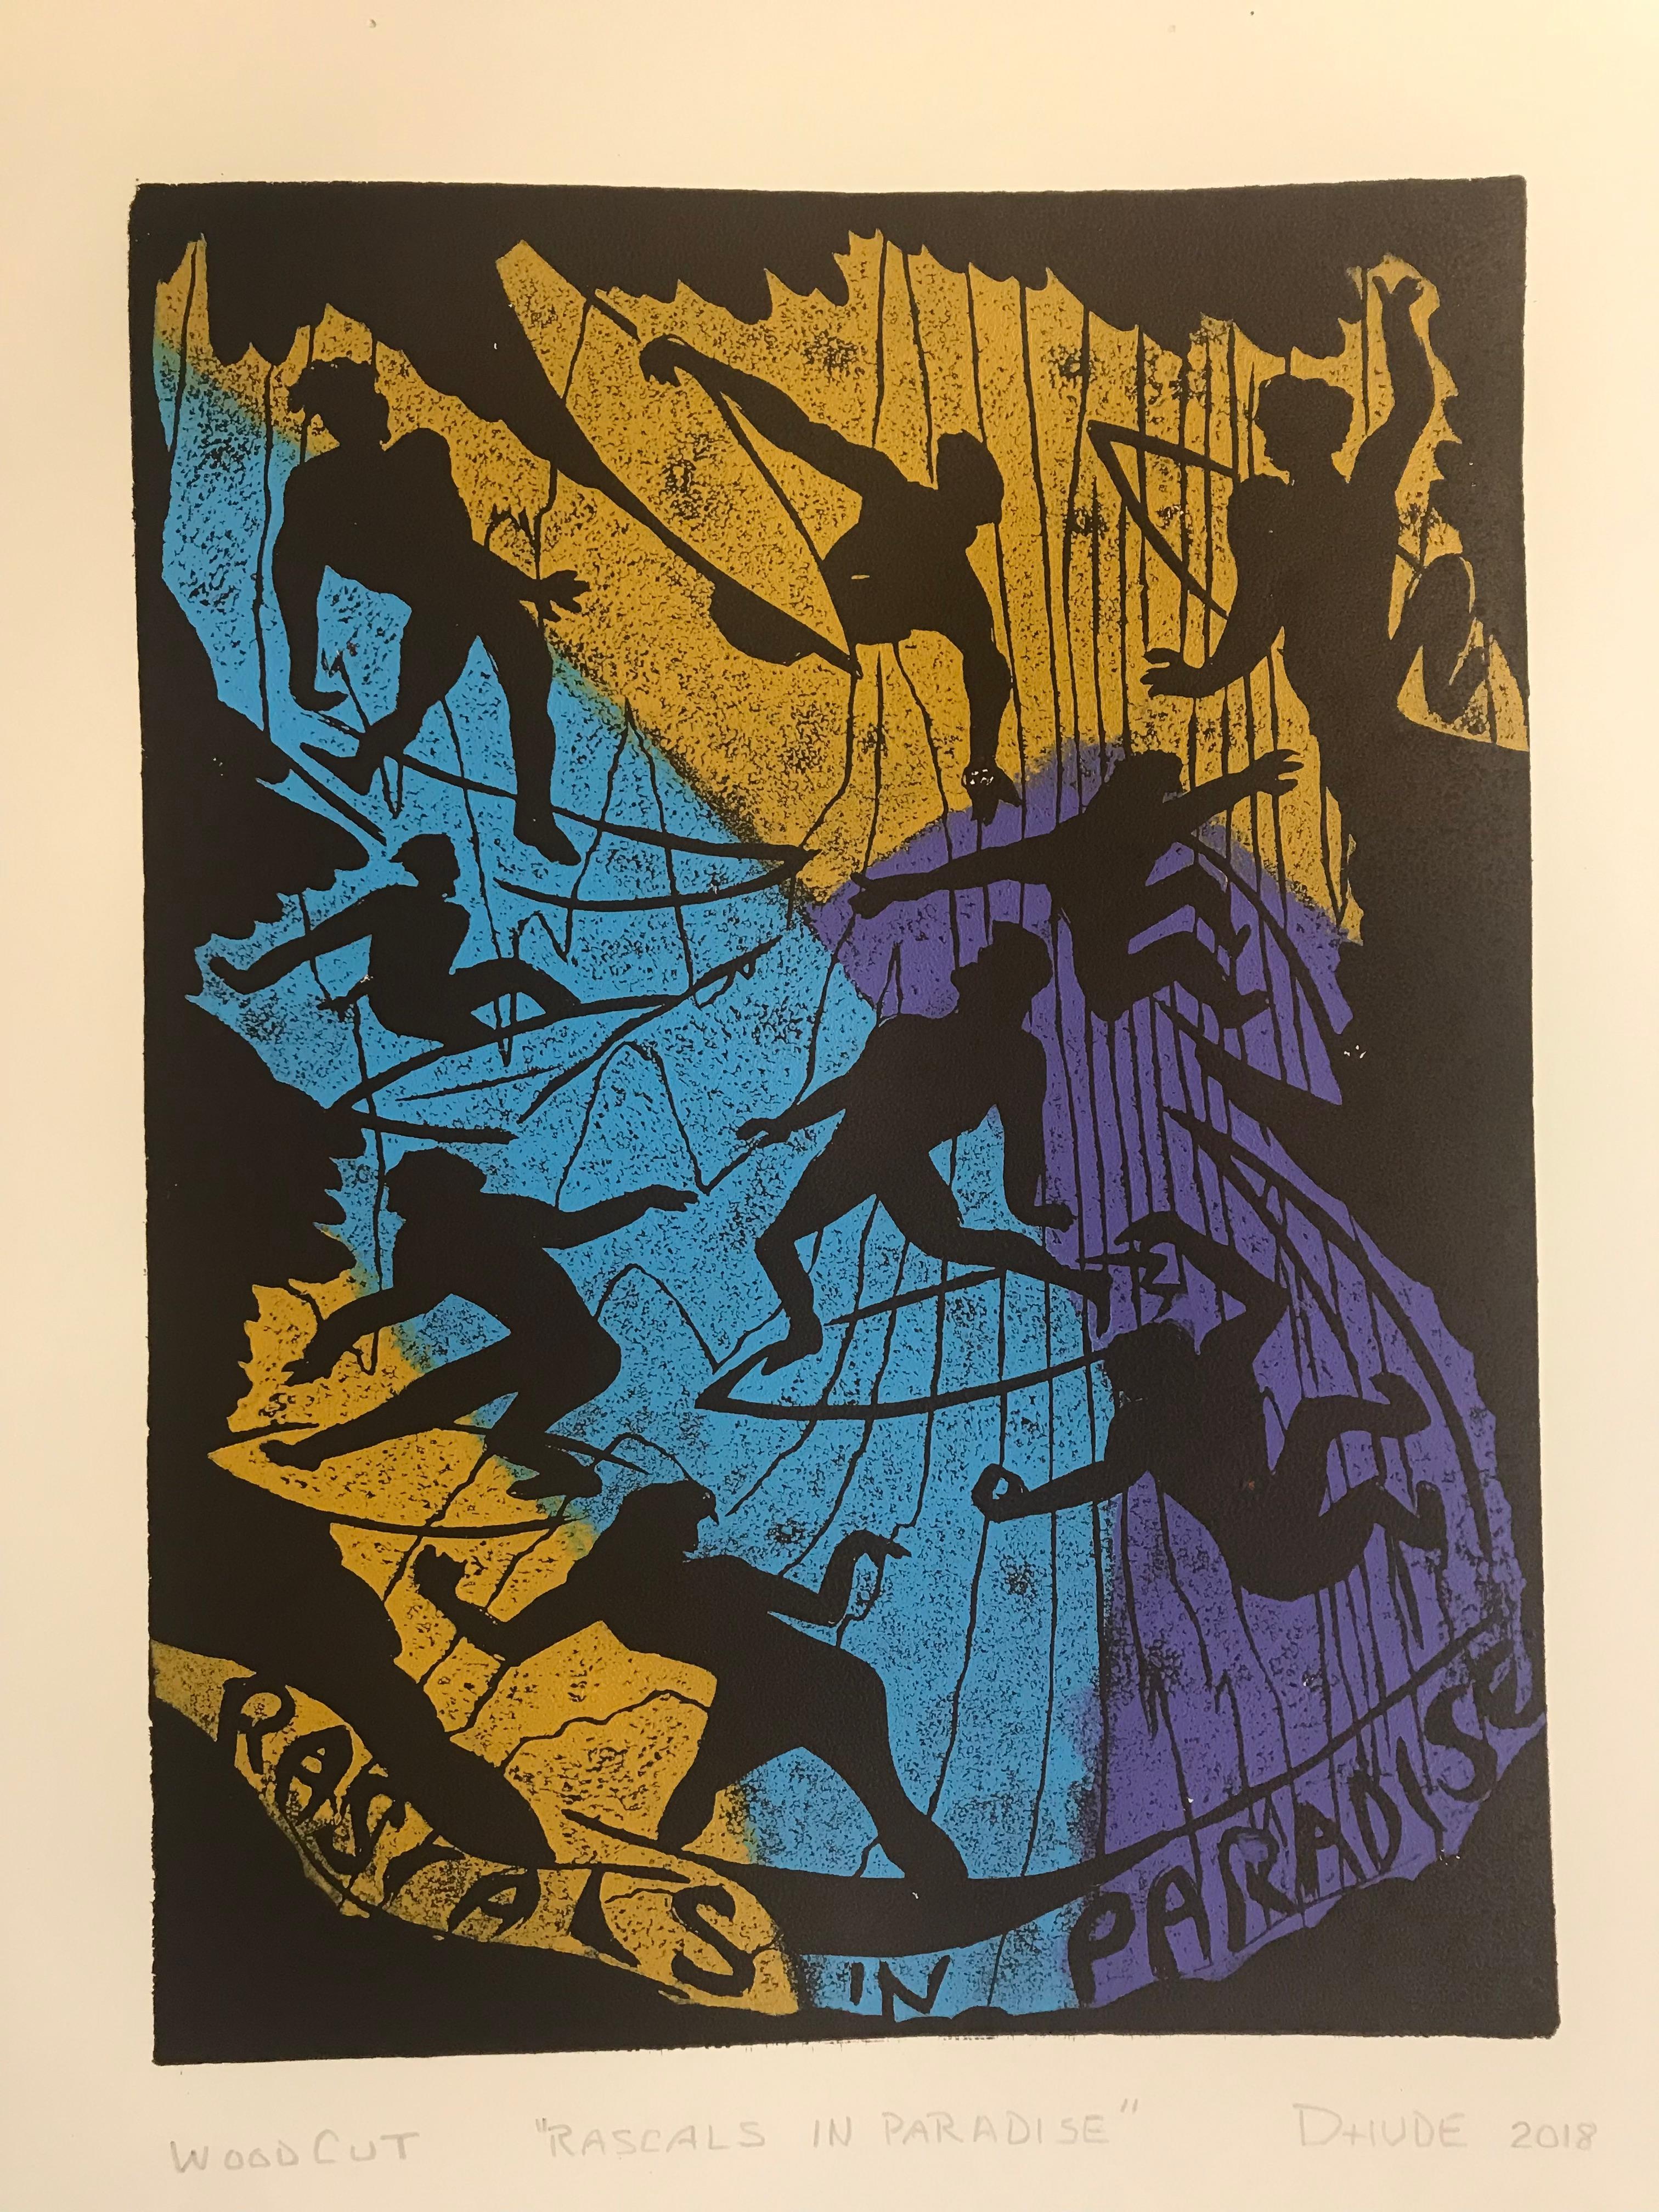  Various surfing gestures and rad moves are the subject matter here, in which the negative space becomes the subject. Printed on buff paper.

Rascals in Paradise - Figurative Print - Woodcut Print By Marc Zimmerman

This masterpiece is exhibited in